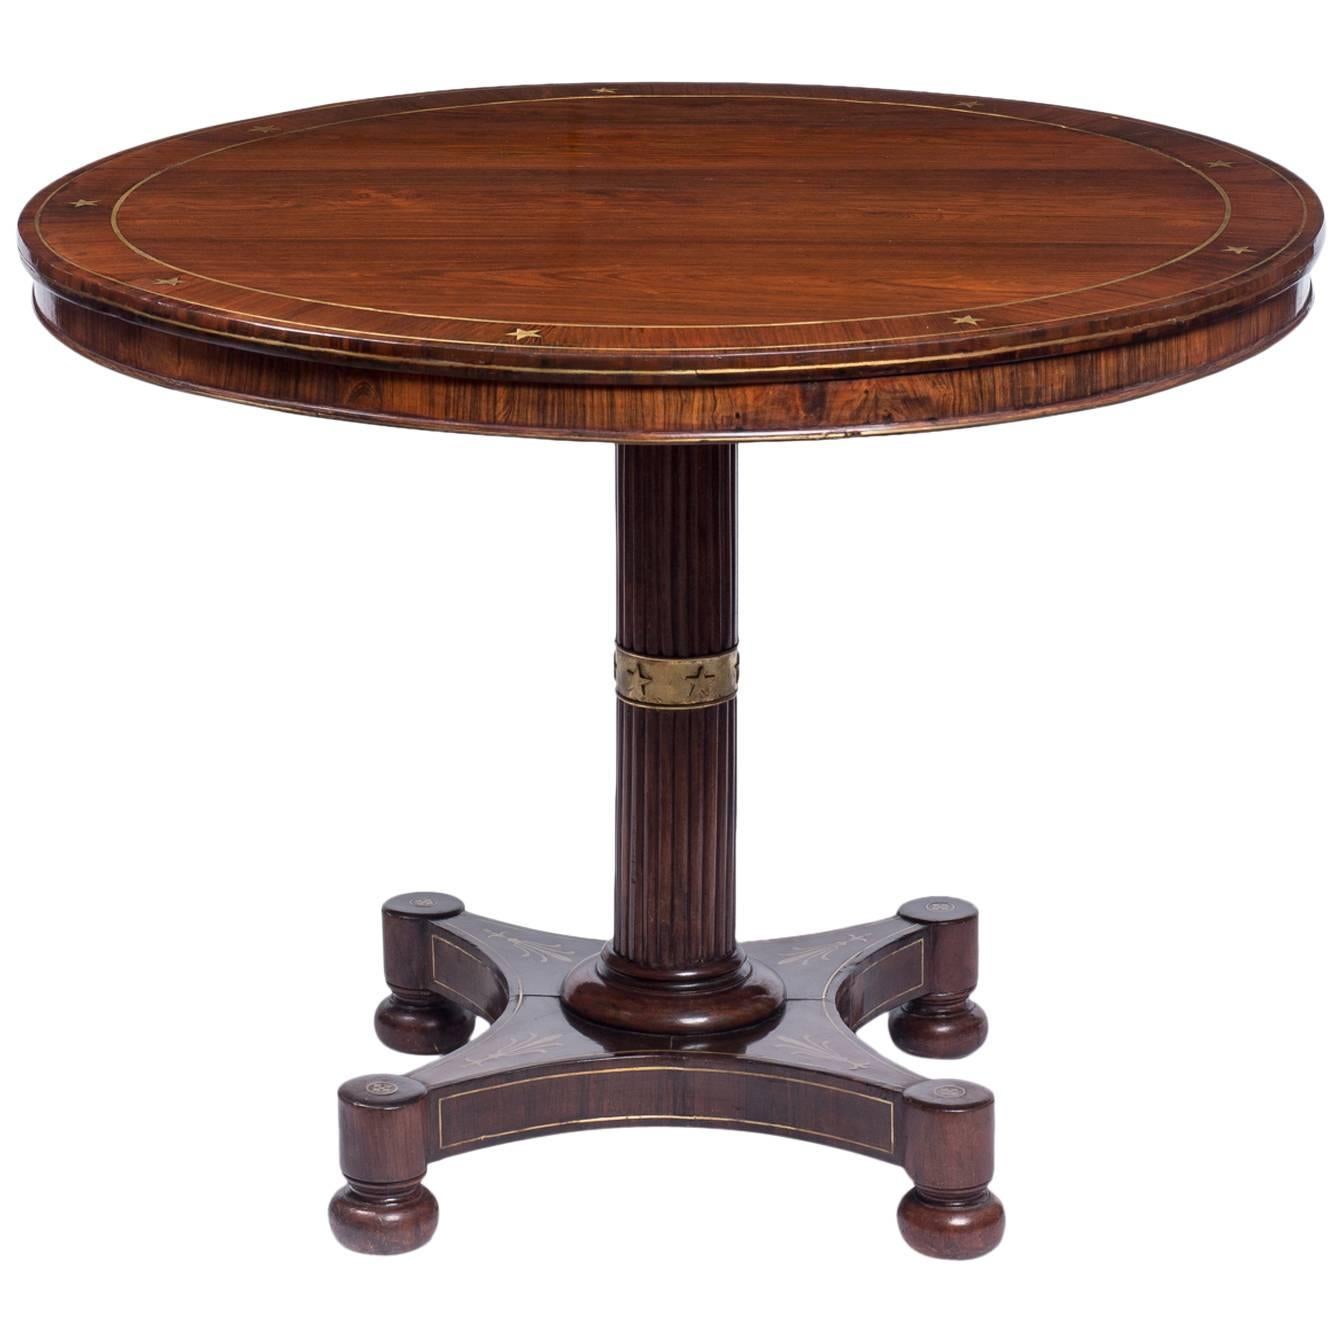 Regency Brass-Inlaid Rosewood Center Table